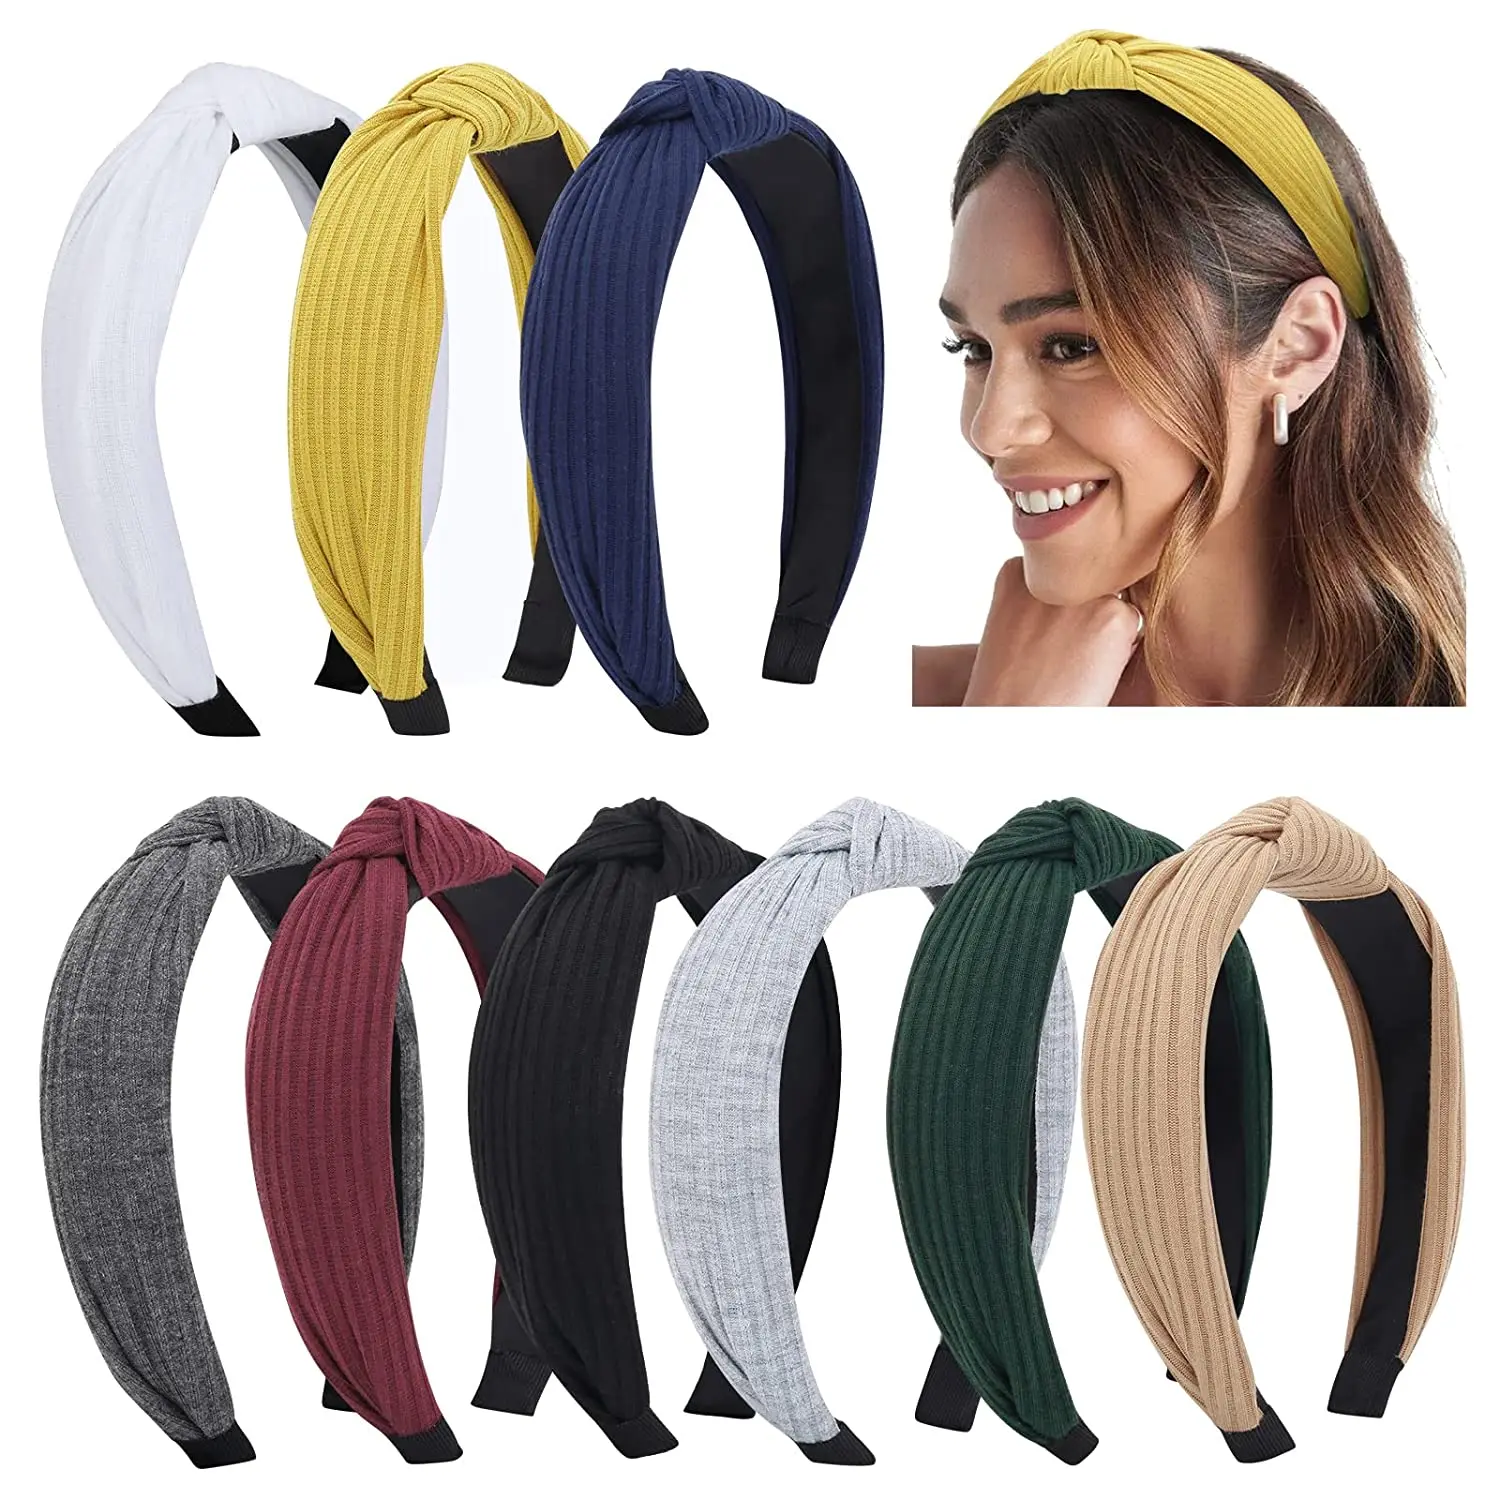 Knotted Solid Headbands for Women Girls Wide Turban Hair Bands Non Slip Top Knot Design Womens Headwear Fashion Hair Accessories